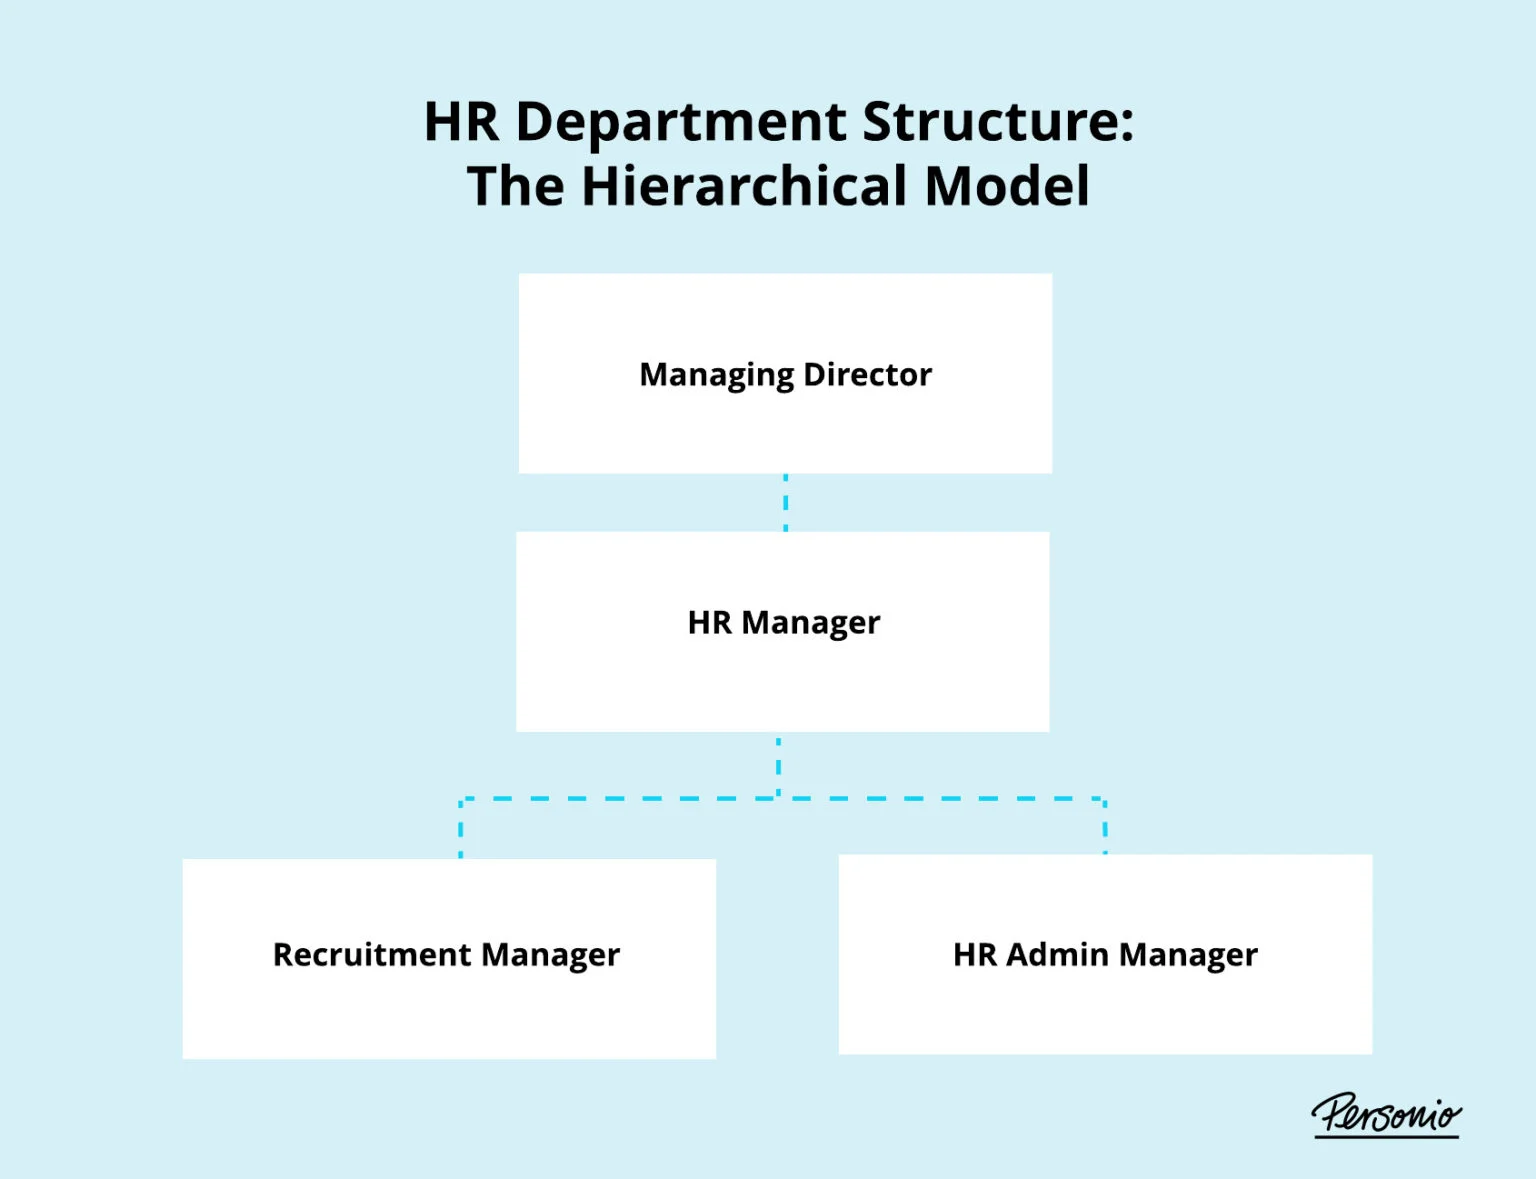 the hierarchical model - hr department structure